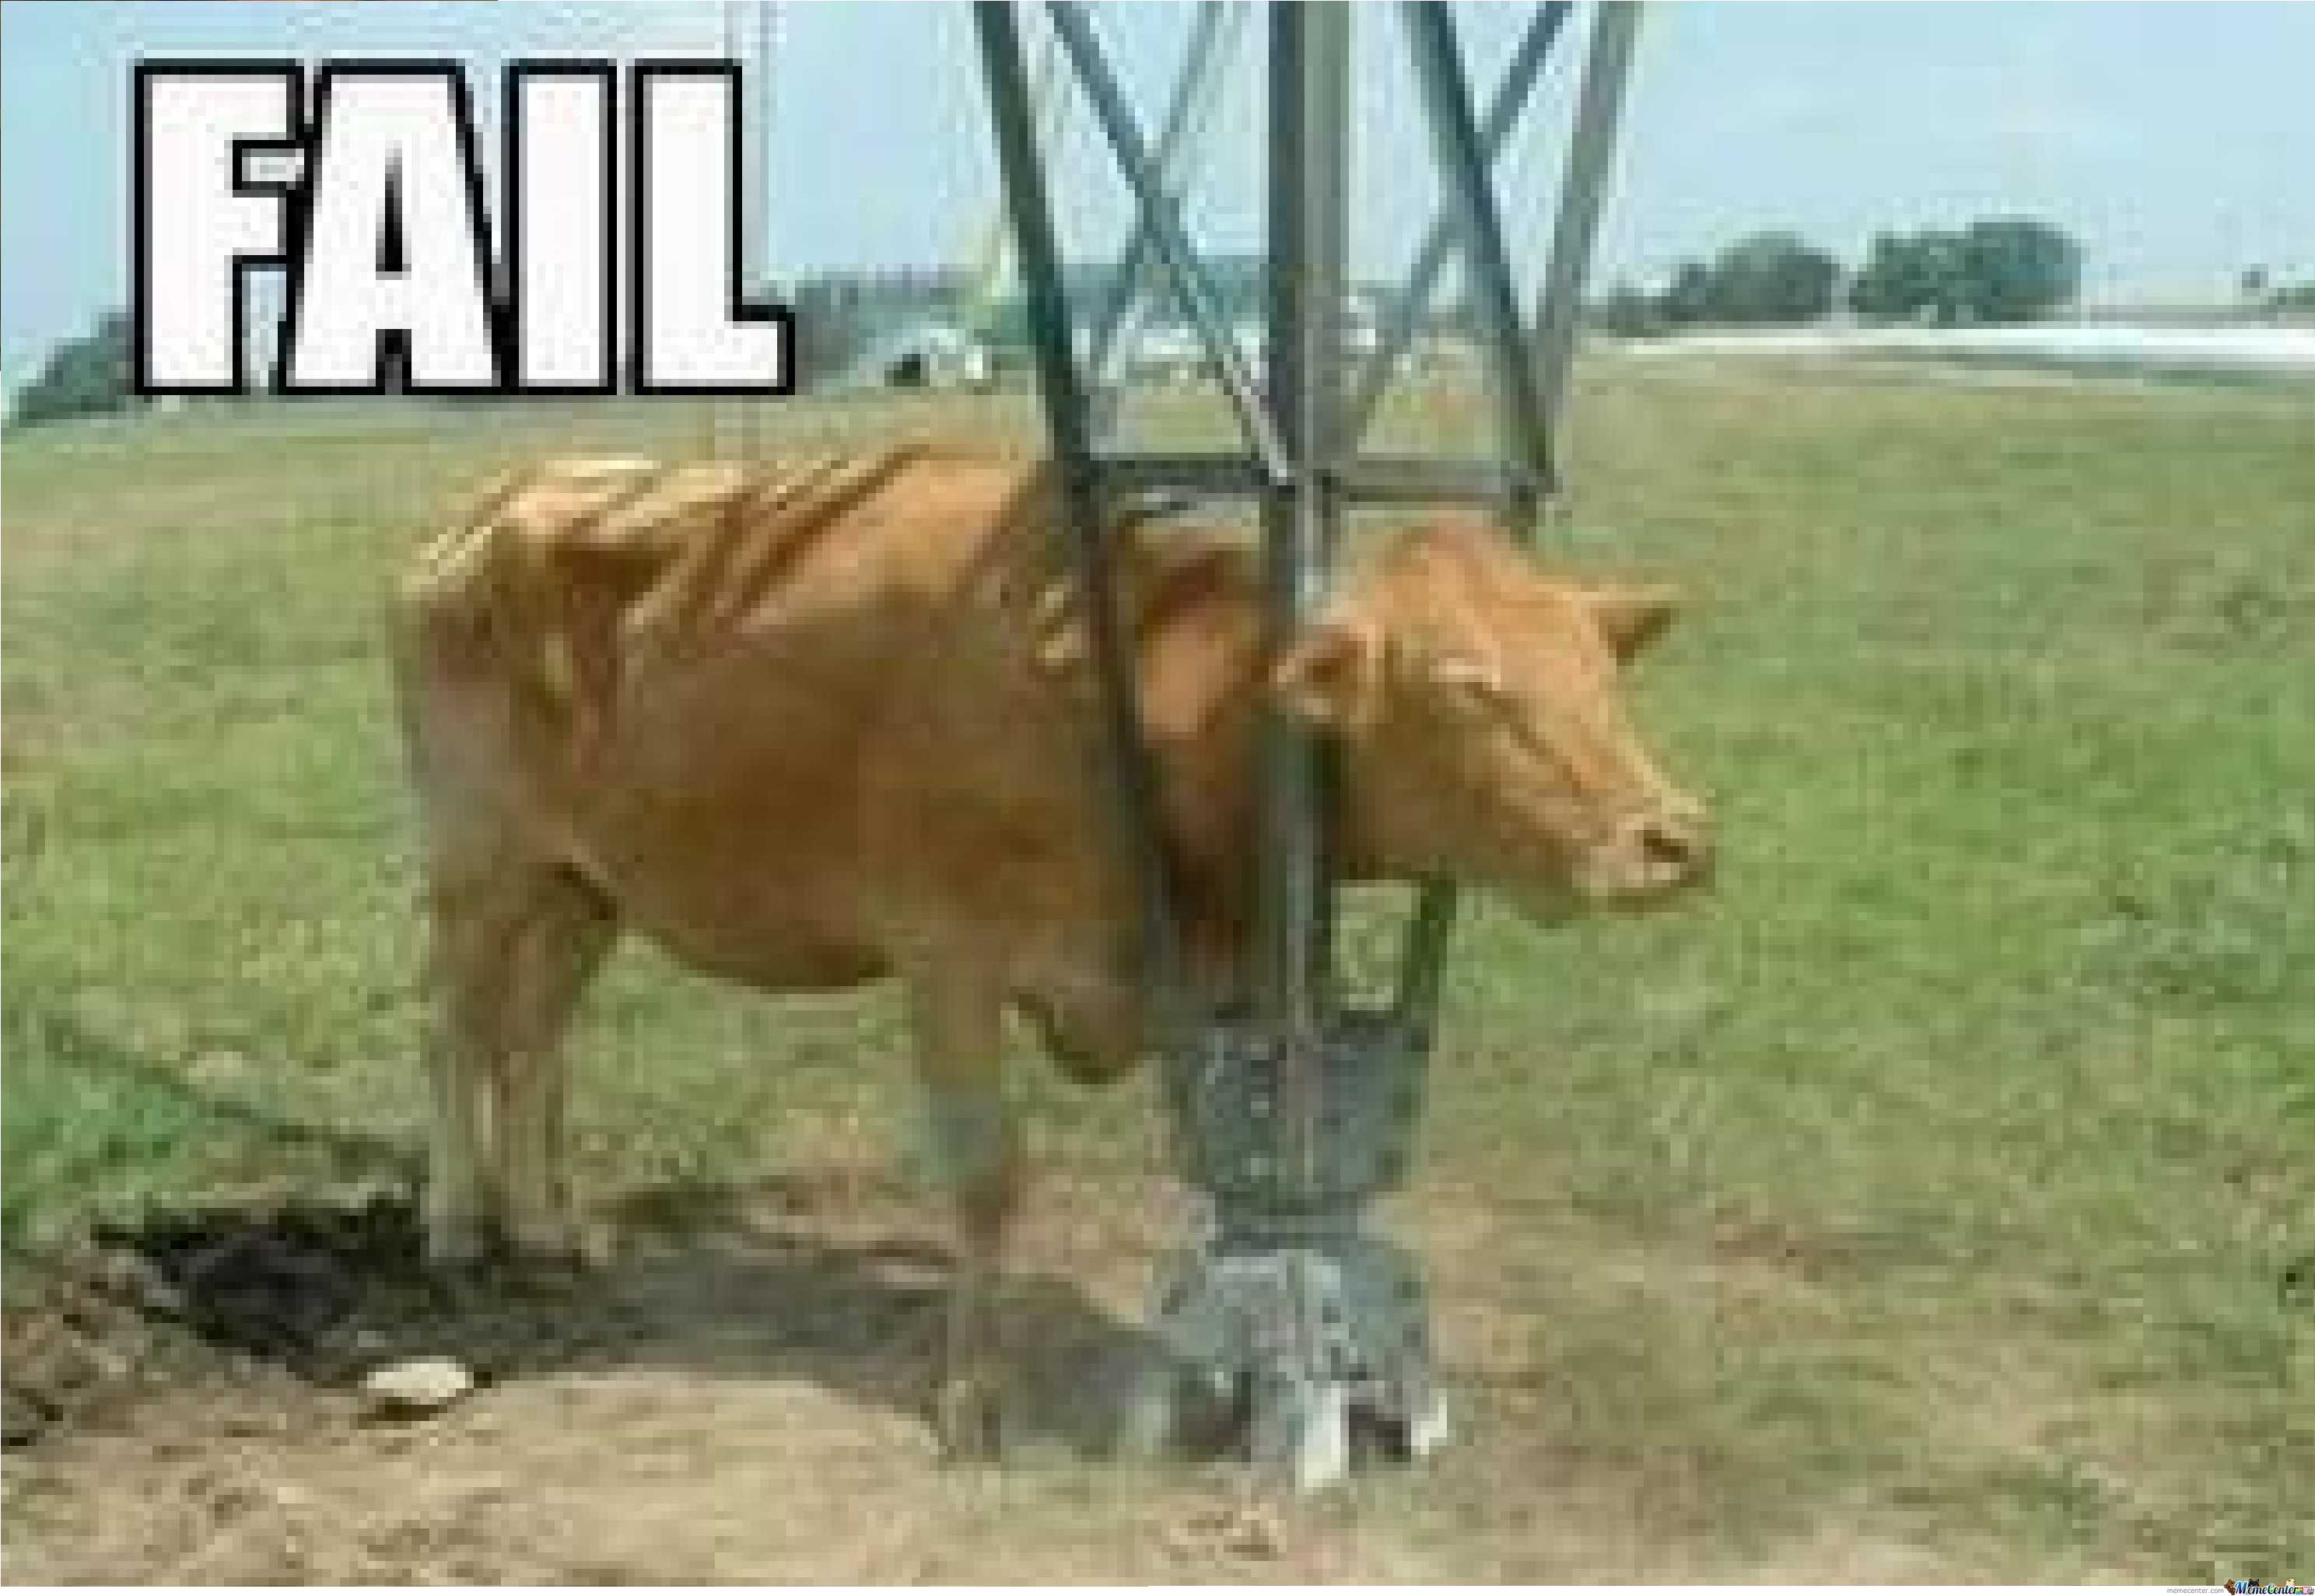 Funny Cow Stuck In Electricity Pole